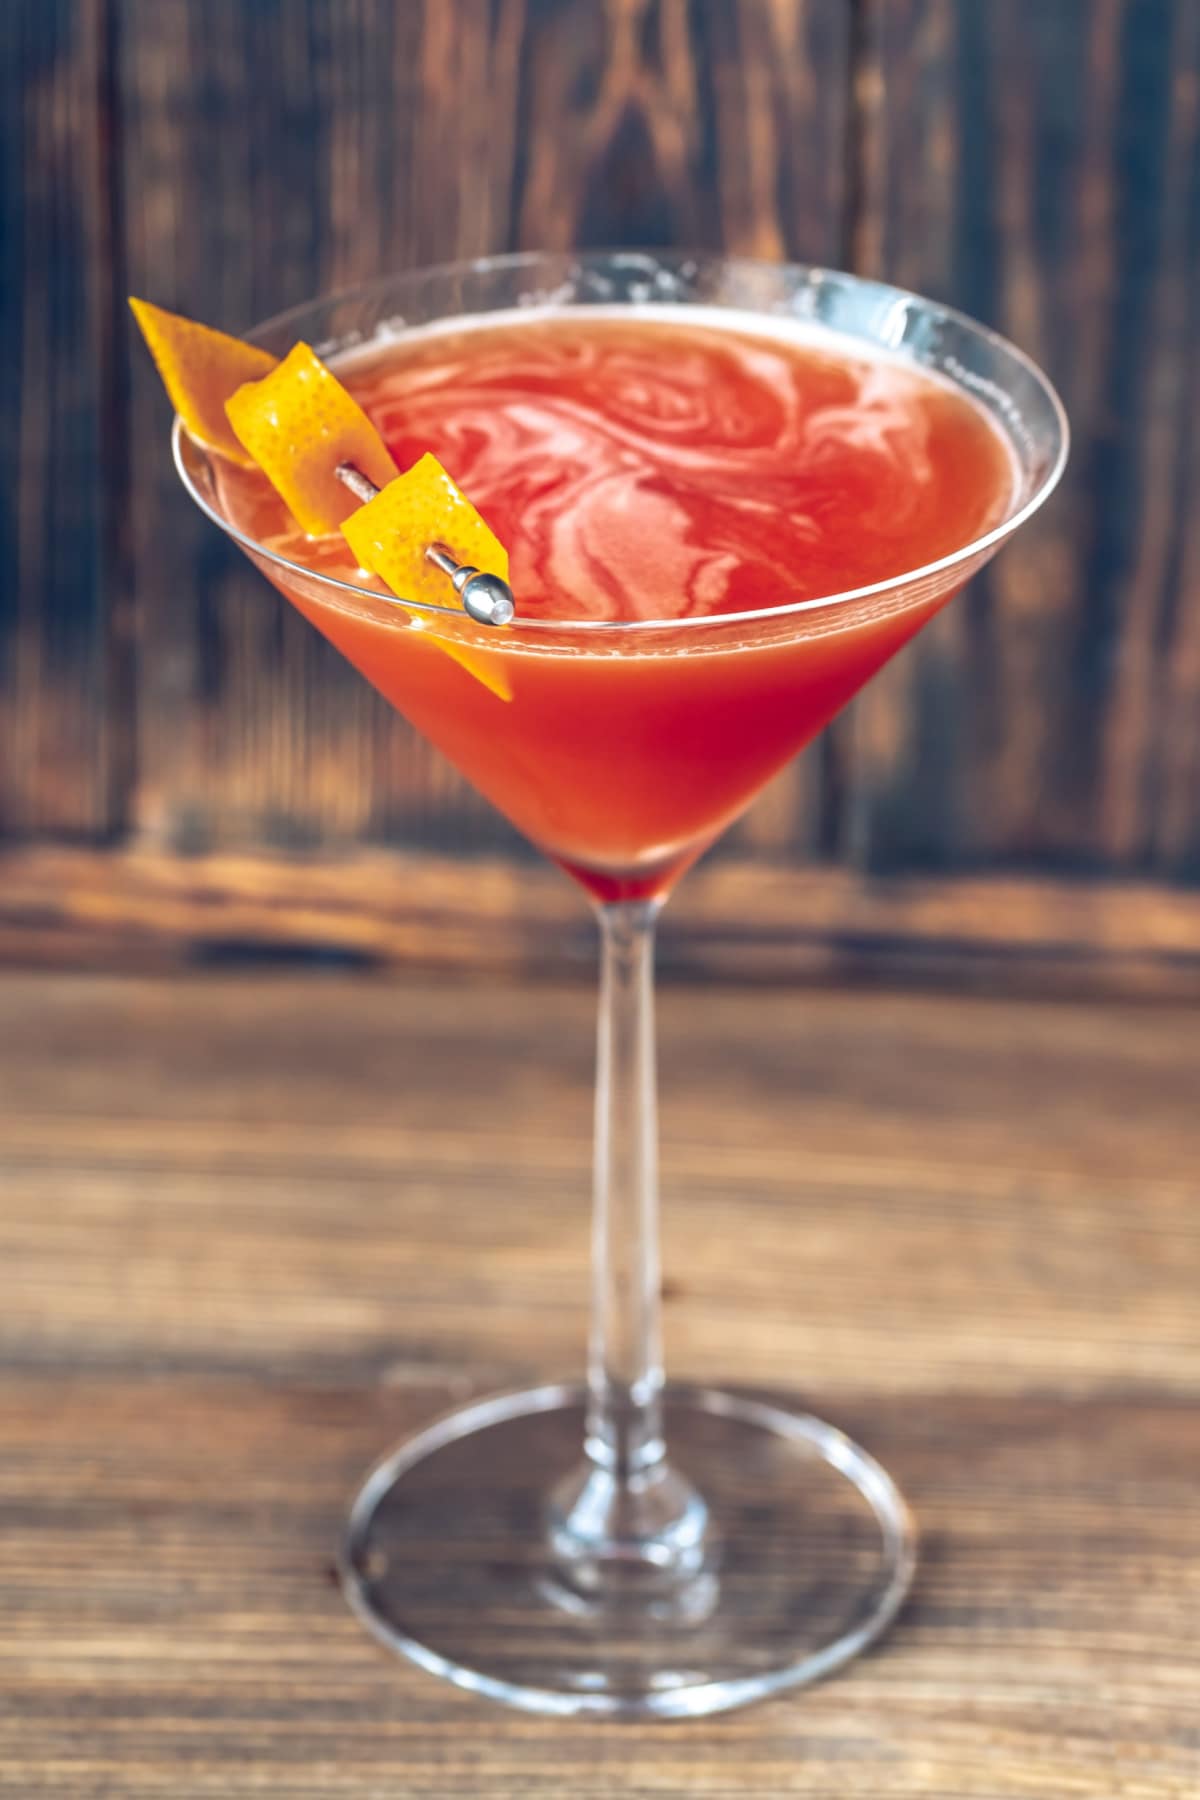 A serving of blood and sand cocktail on a martini glass garnished with lemon peel.